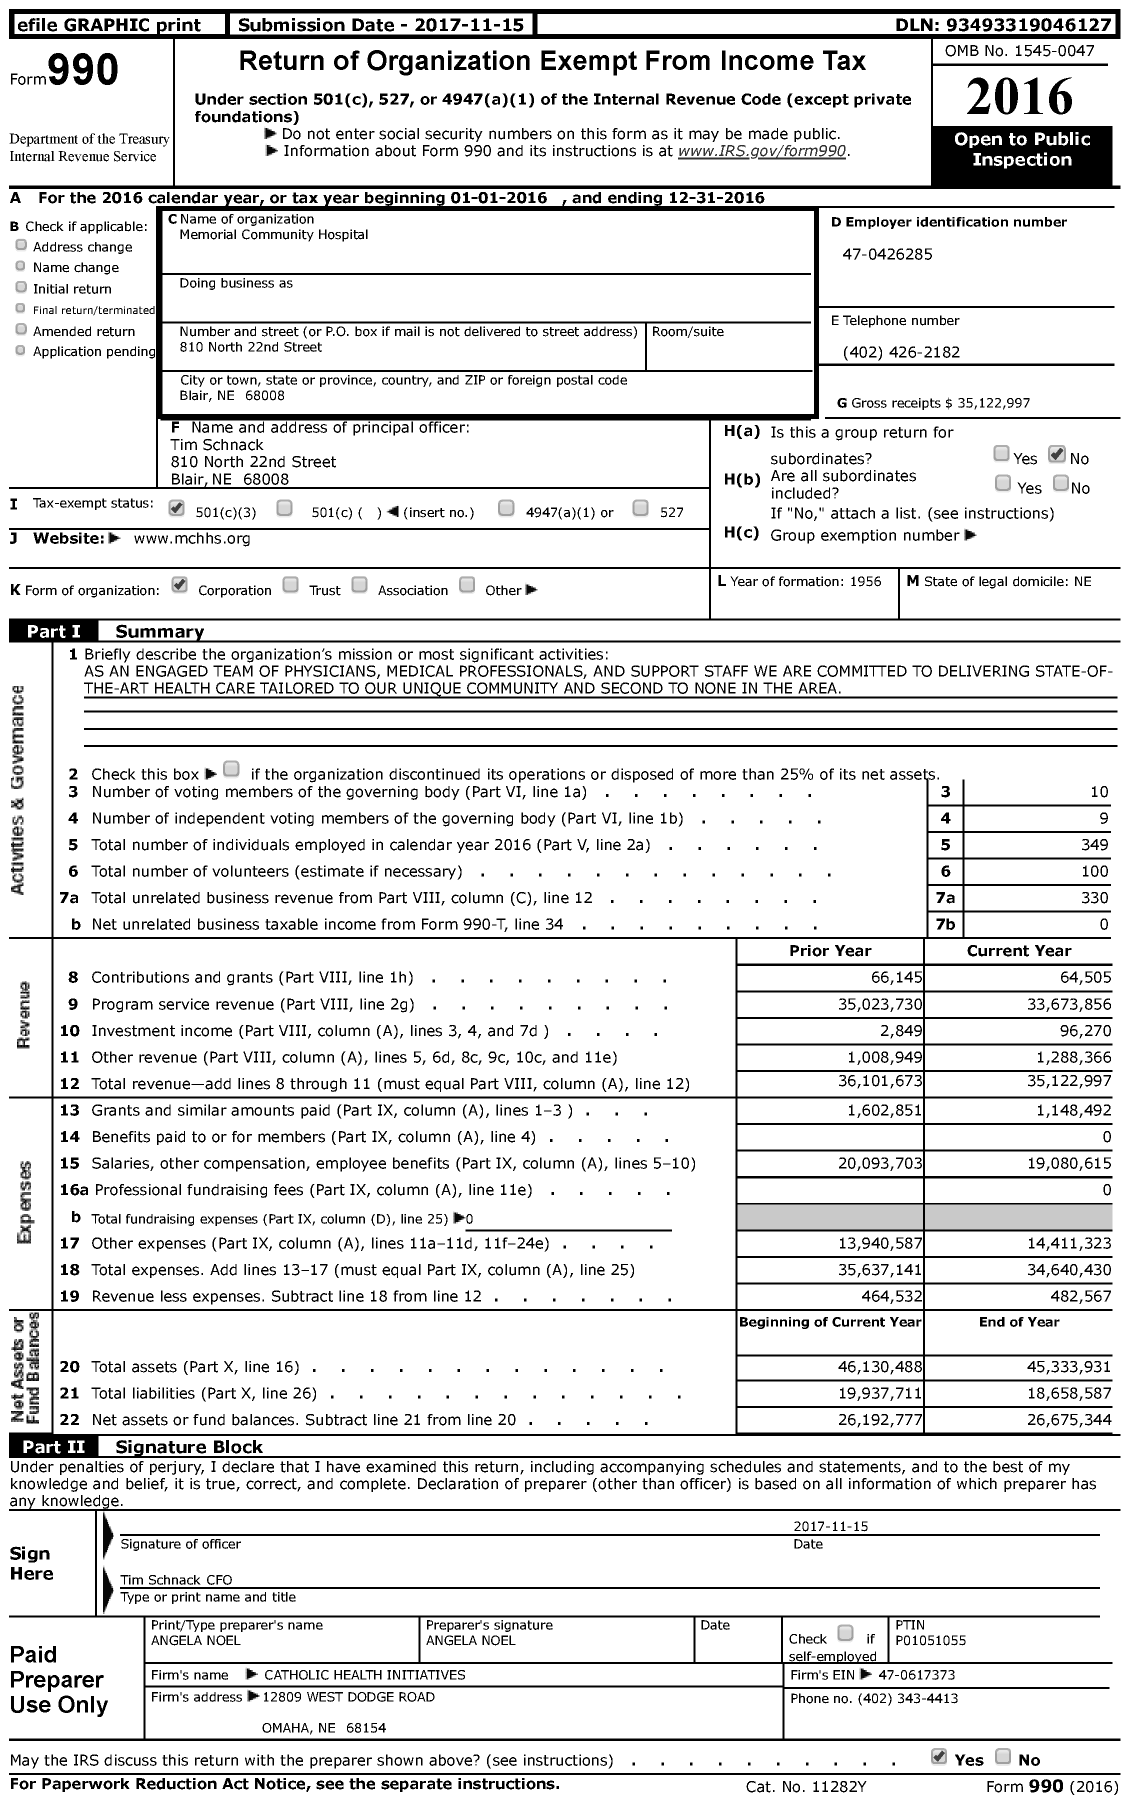 Image of first page of 2016 Form 990 for Memorial Community Hospital (MCH&HS)